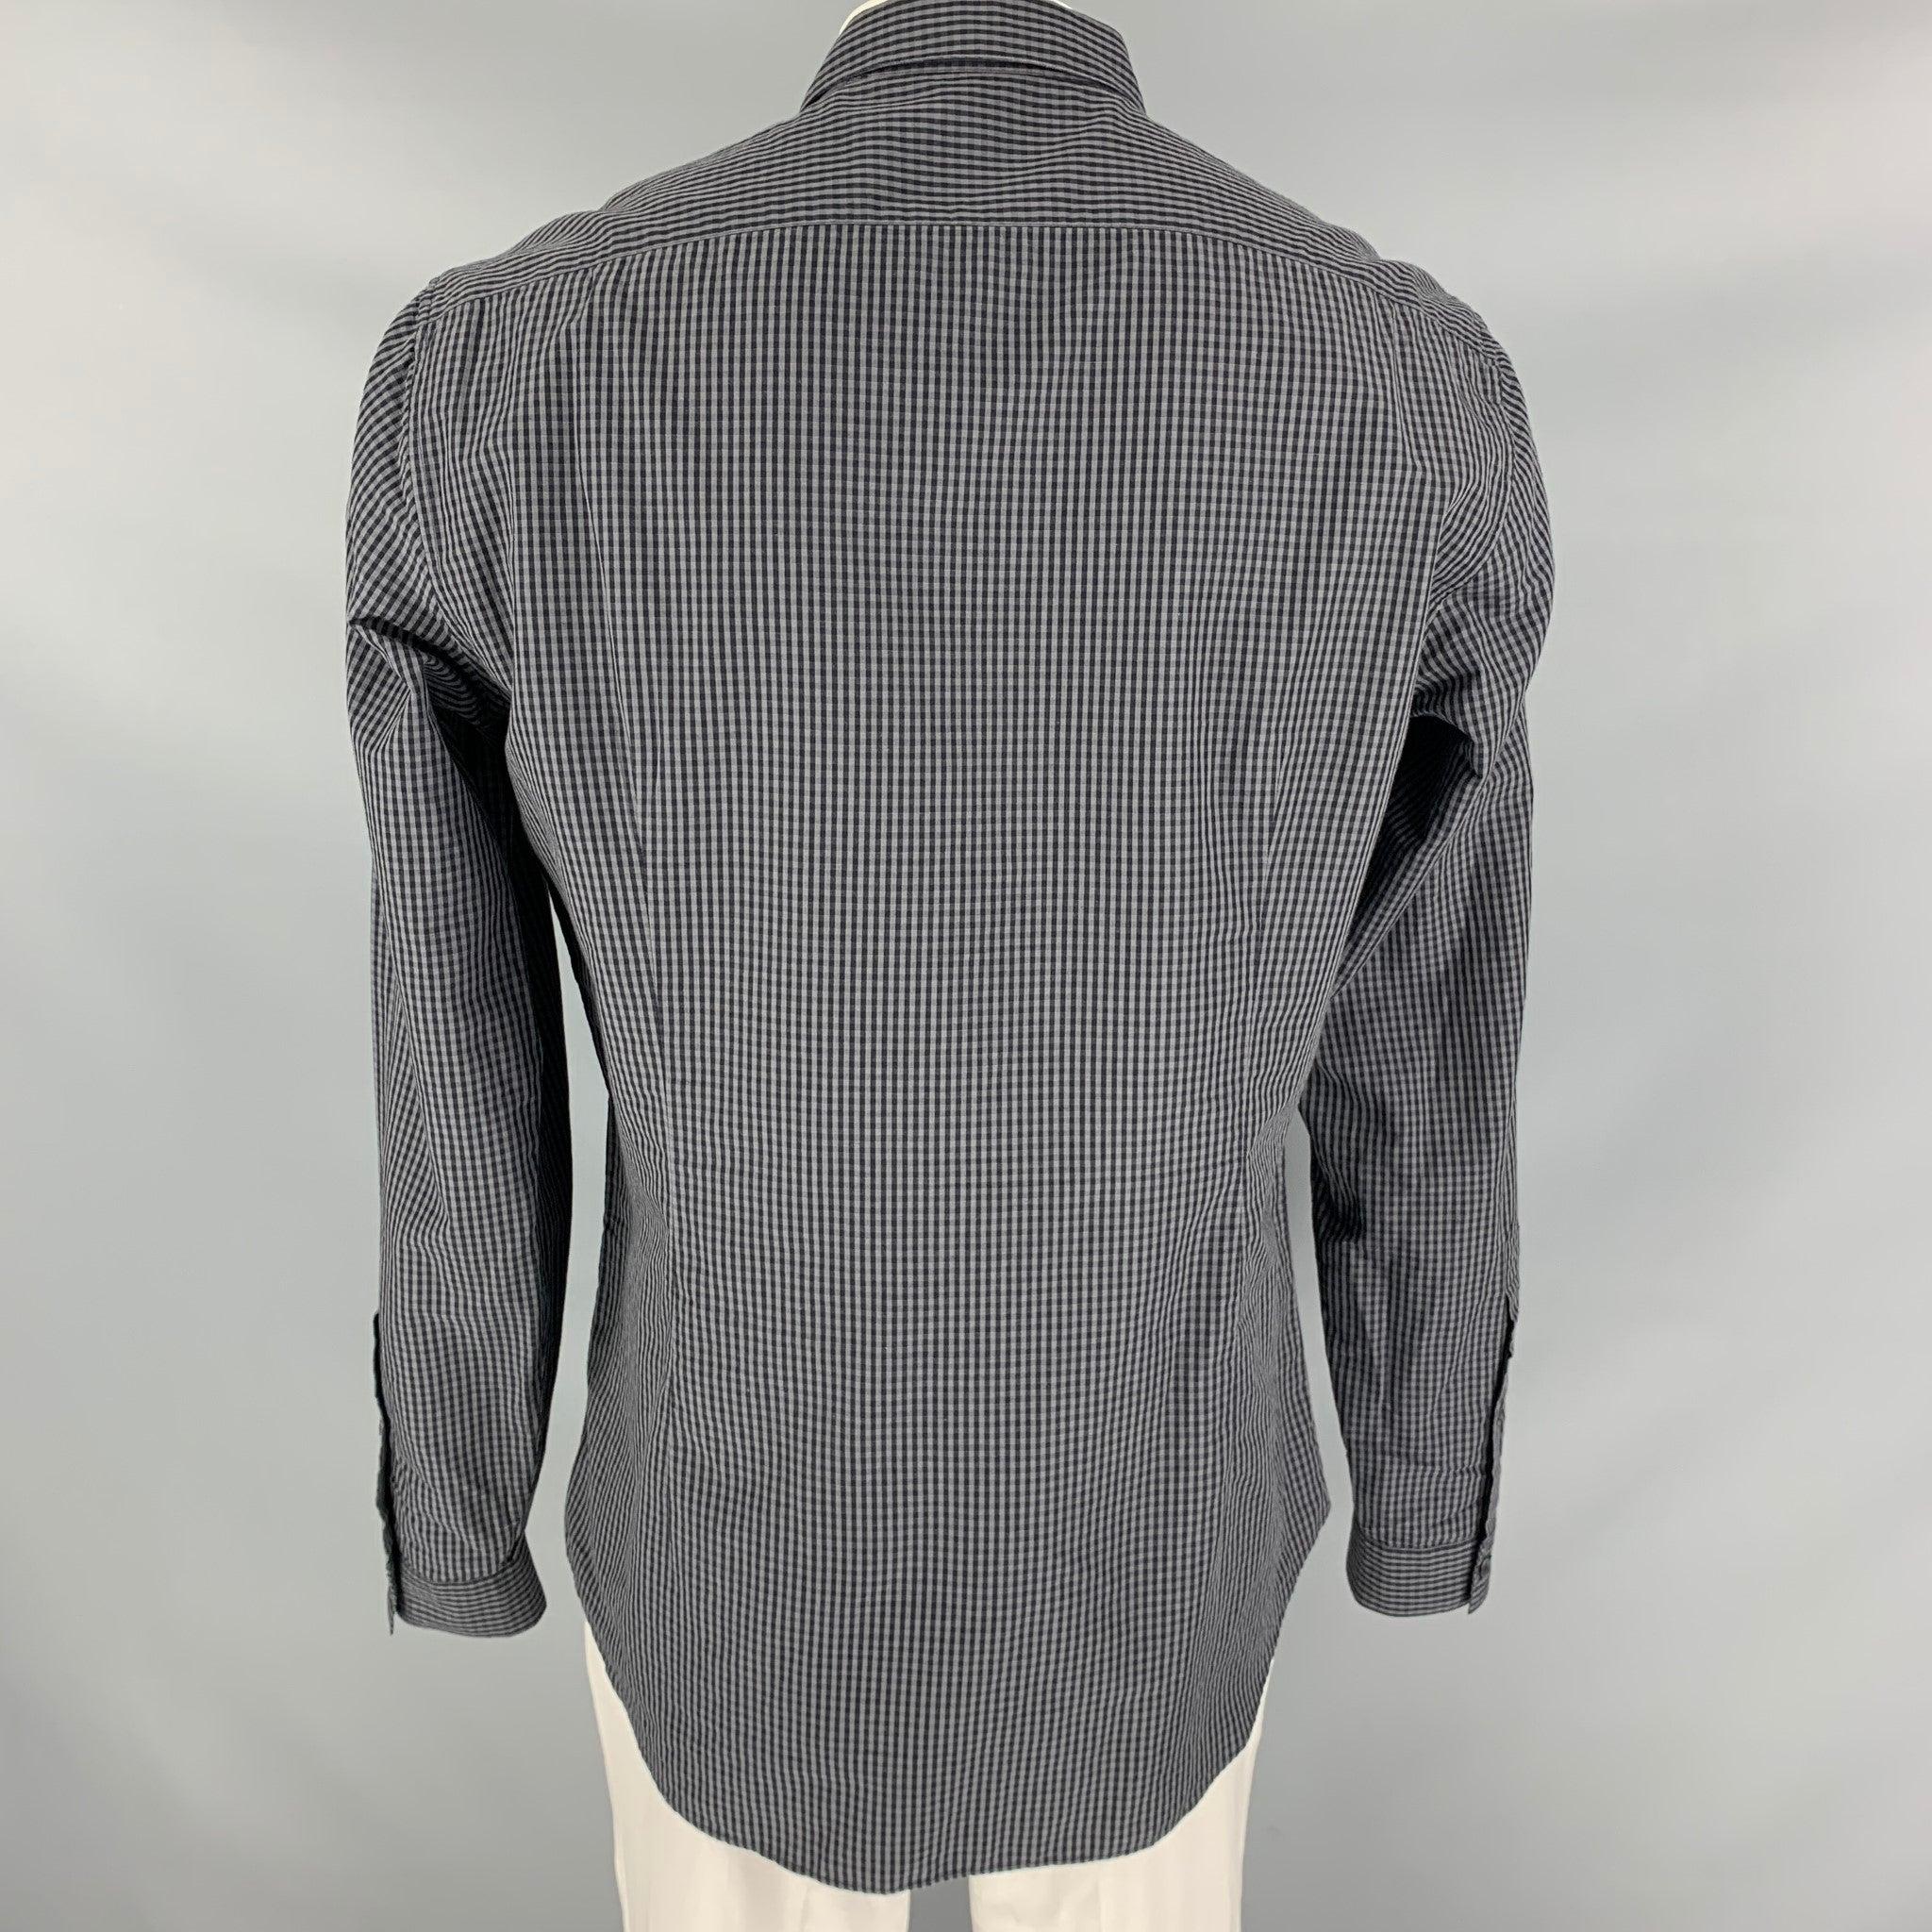 BURBERRY PRORSUM Size XL Grey Gingham Hidden Buttons Long Sleeve Shirt In Good Condition For Sale In San Francisco, CA